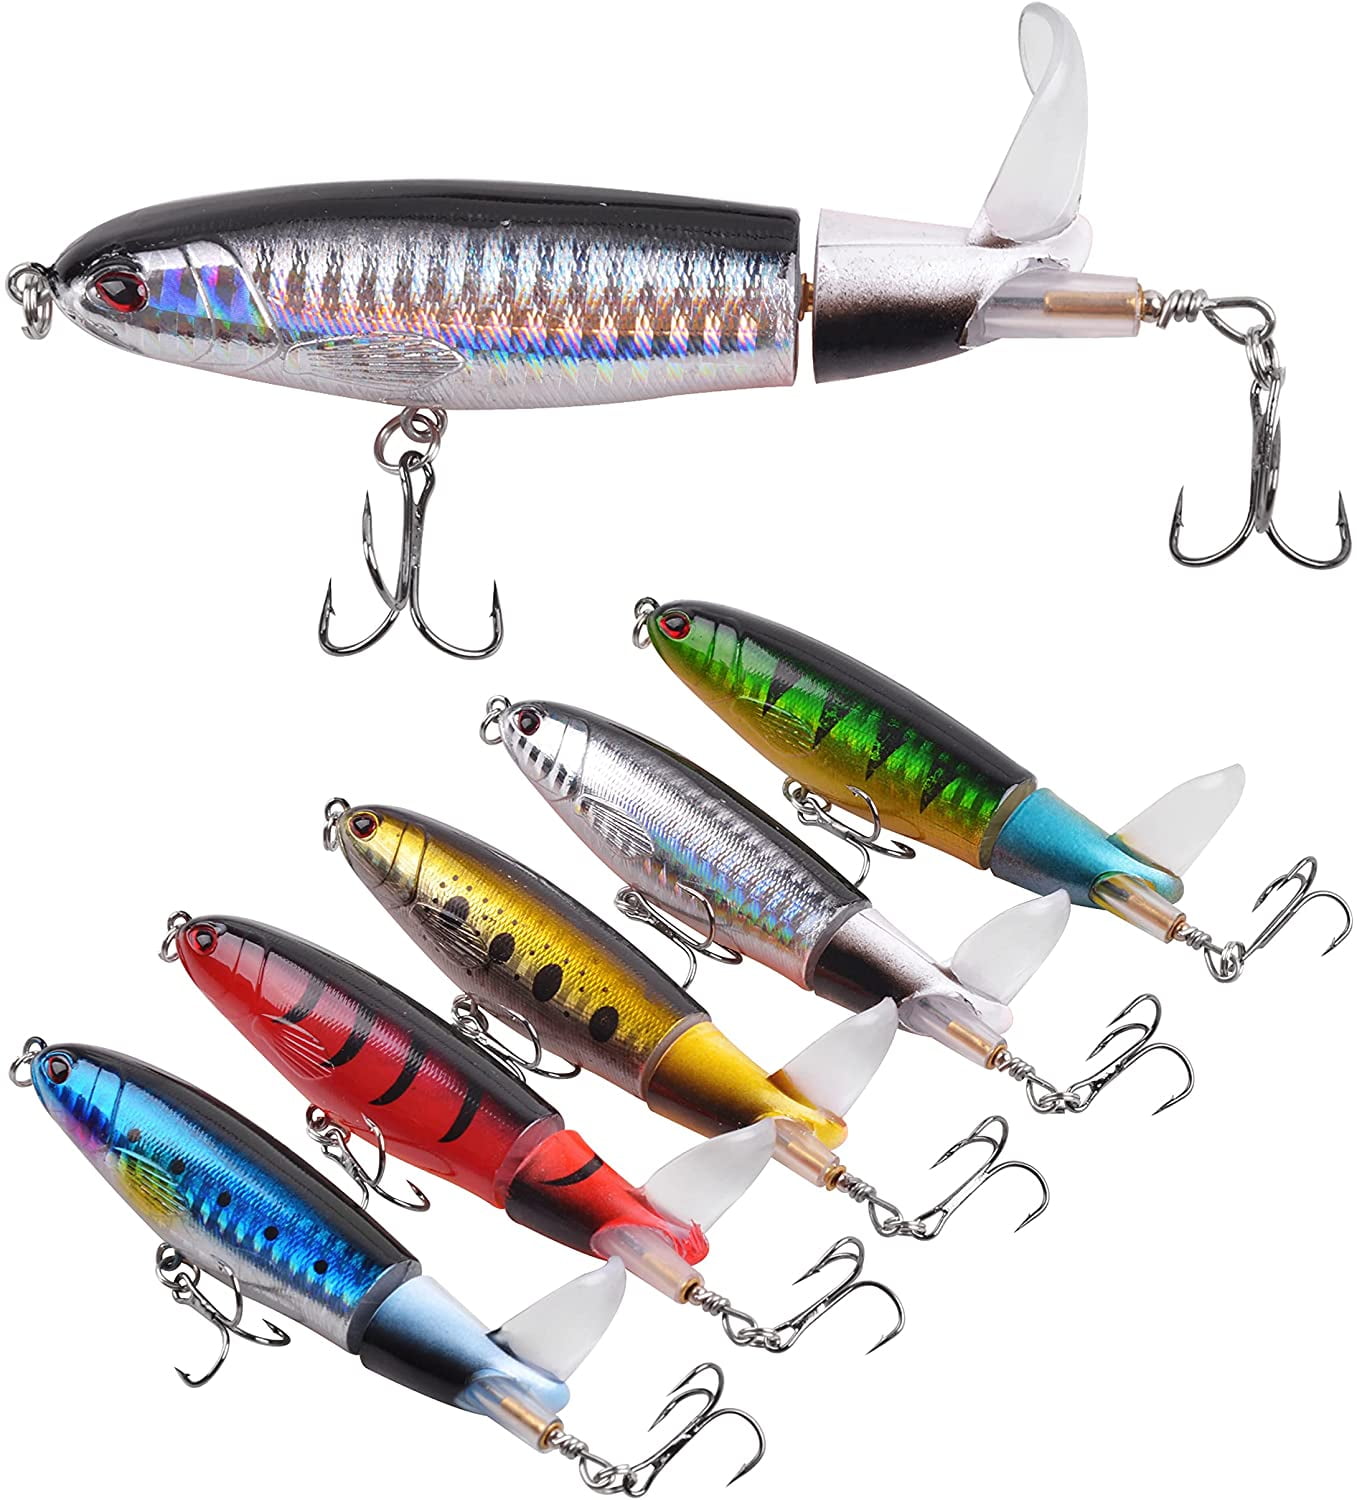 MoKo Fishing Topwater Bass Lures, Freshwater Saltwater Kit Lifelike  Artificial Bass Lures Floating Rotating Tail Lures Bait with Barb Treble  Hooks